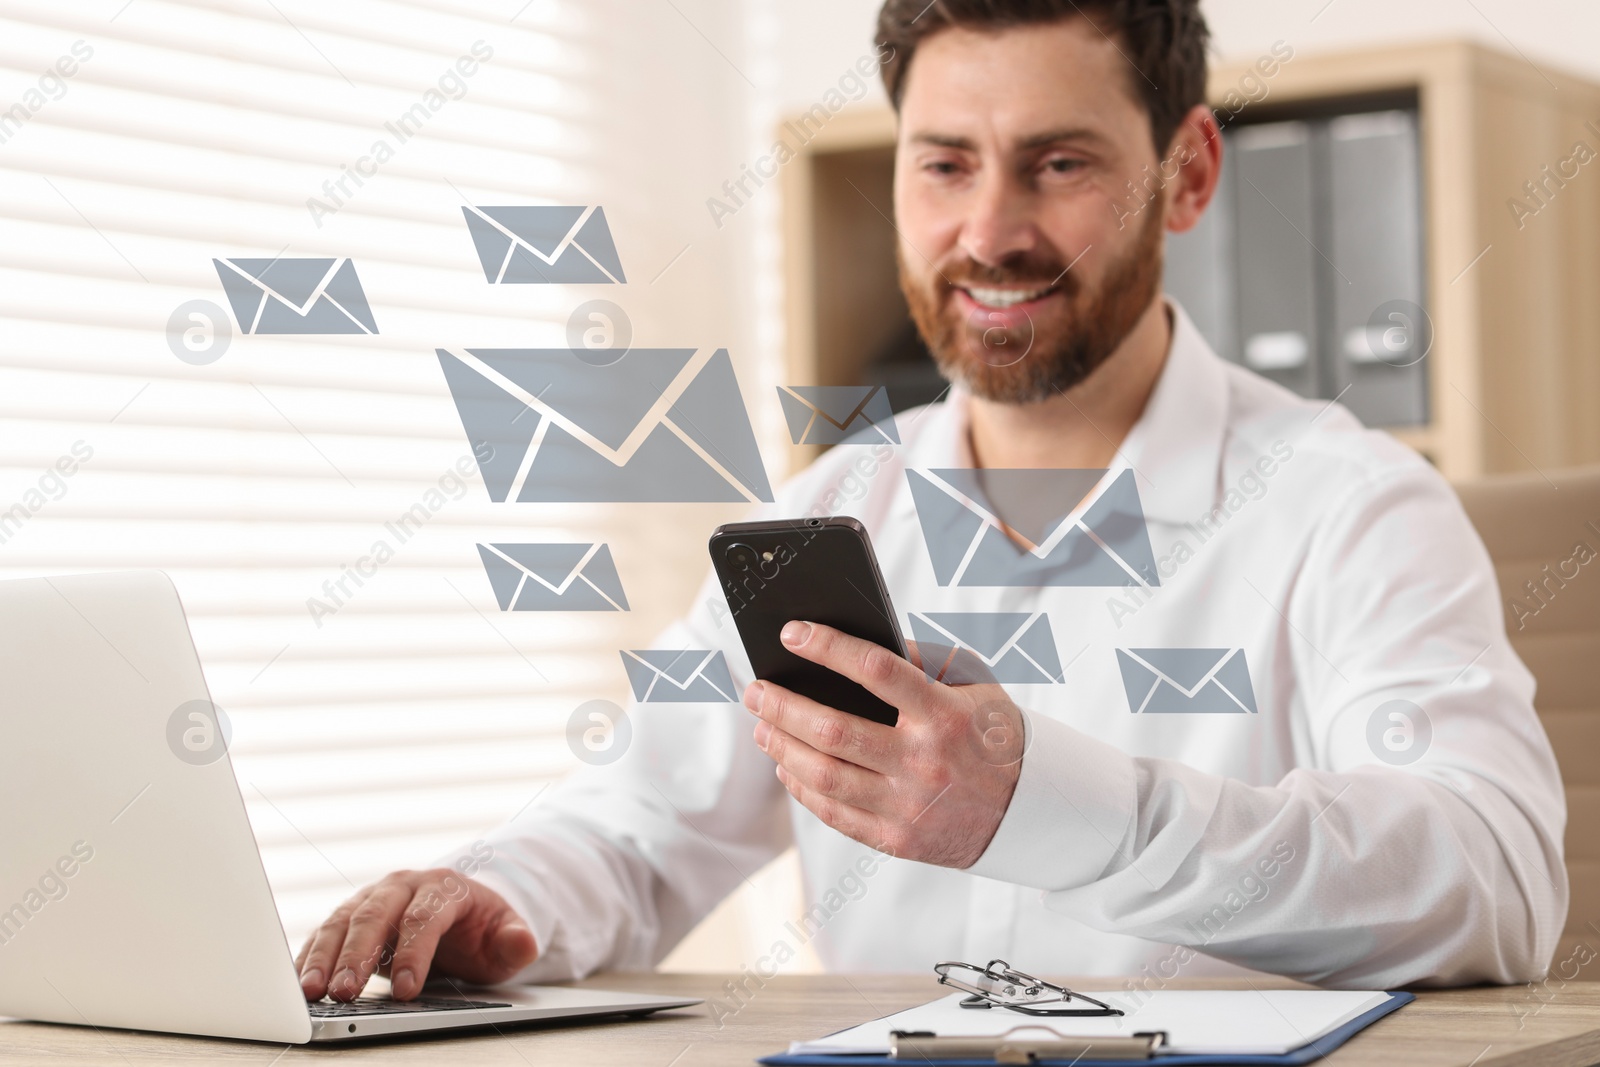 Image of Smiling man with smartphone chatting at table in office. Many illustrations of envelope as incoming messages around device